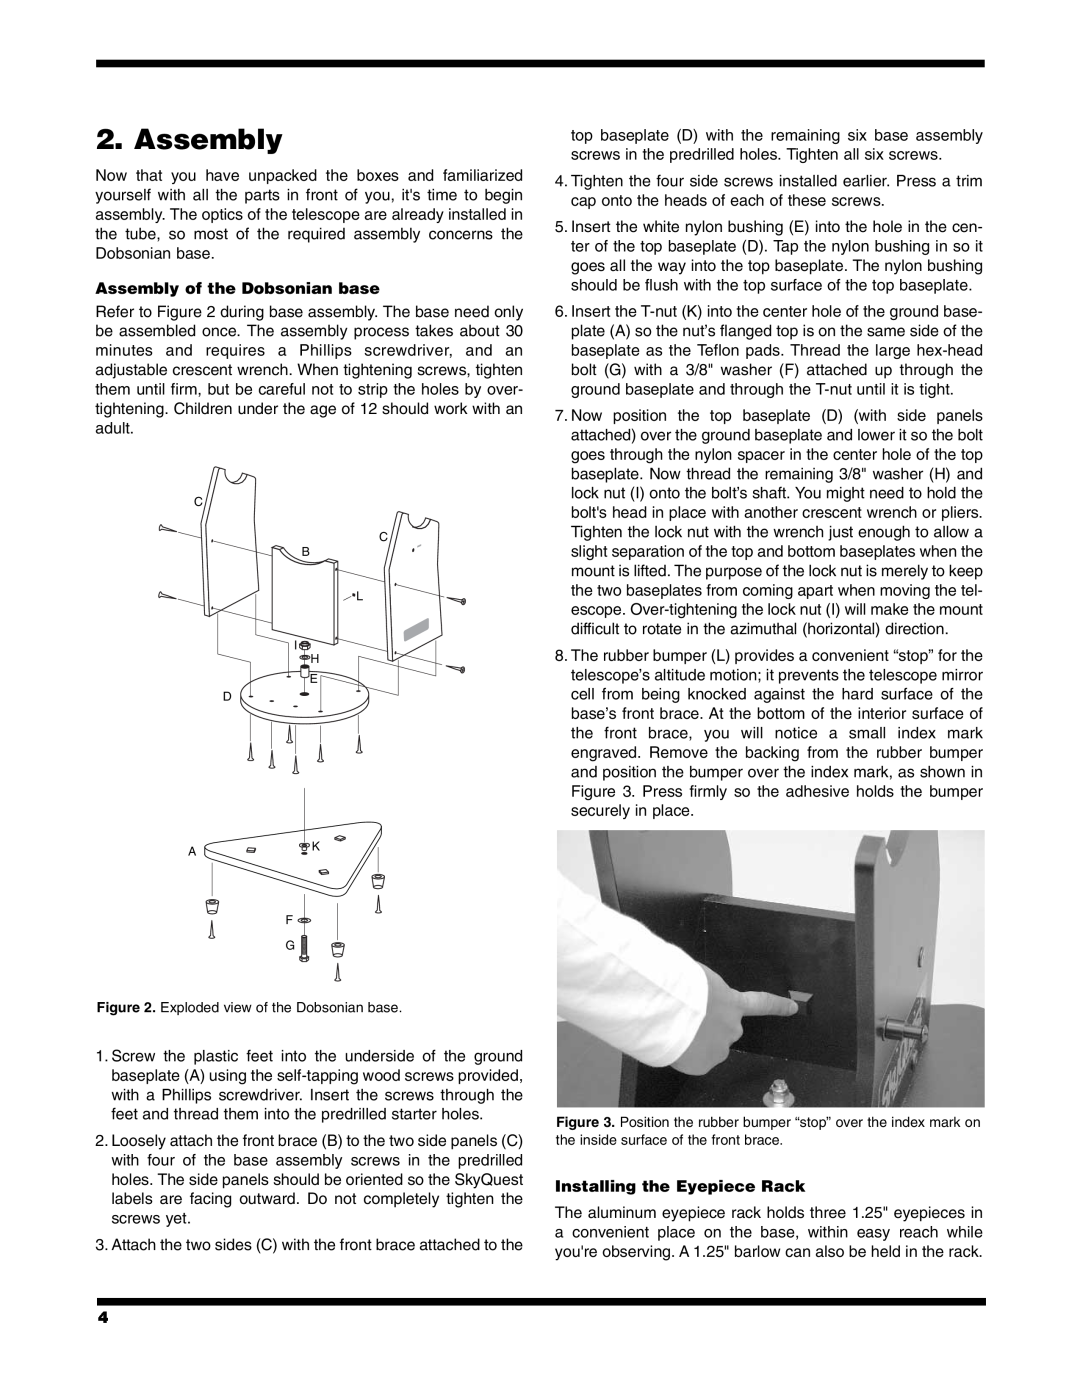 Orion XT4.5 instruction manual Assembly of the Dobsonian base, Installing the Eyepiece Rack 